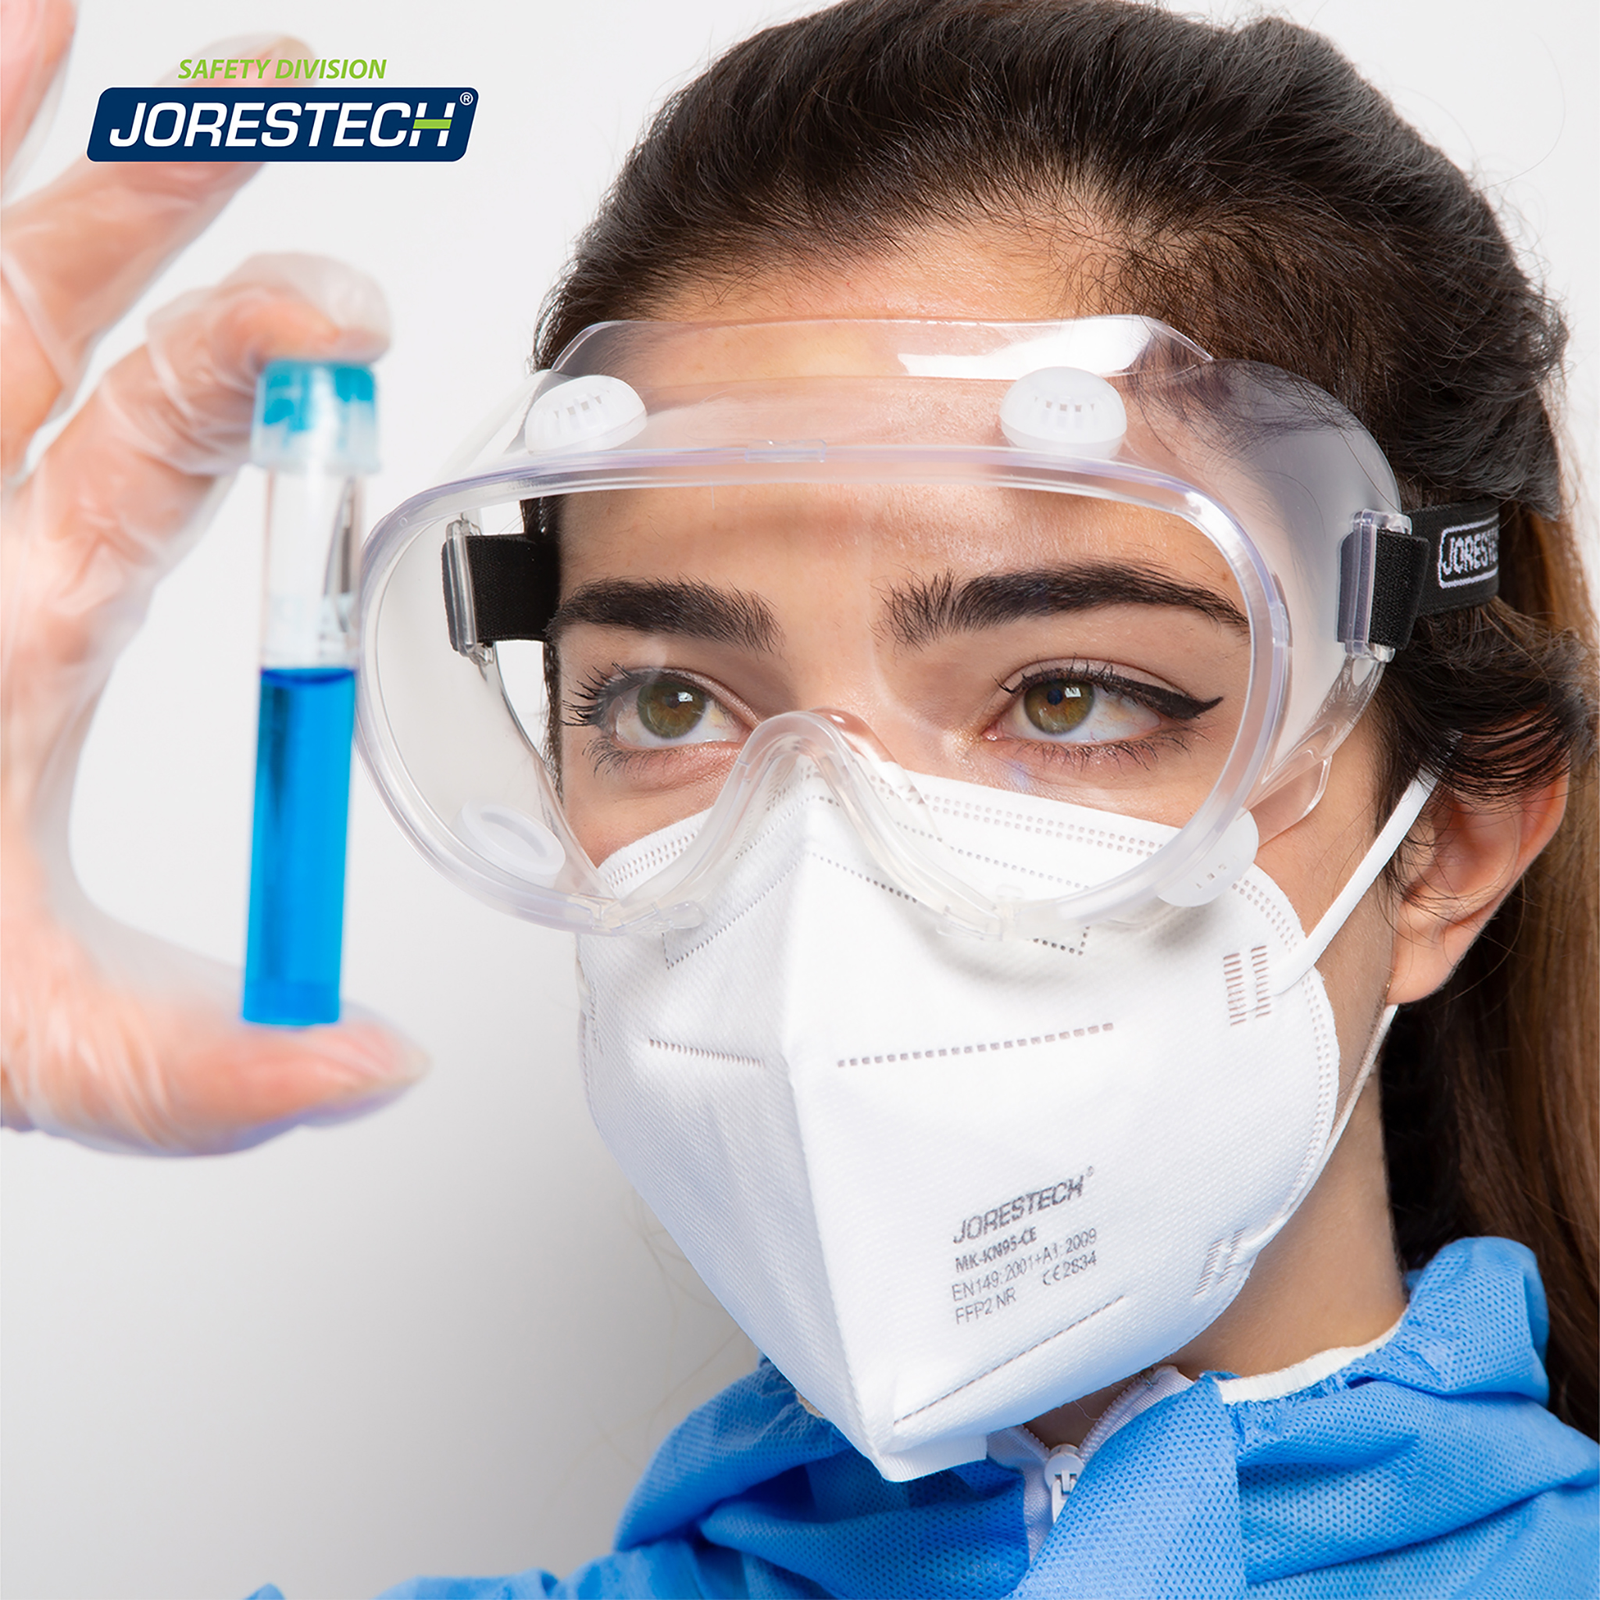 Woman wearing the Anti fog ventilated safety goggles and disposable clothing in a setting of a laboratory. She is inspecting a blue liquid inside a glass tube